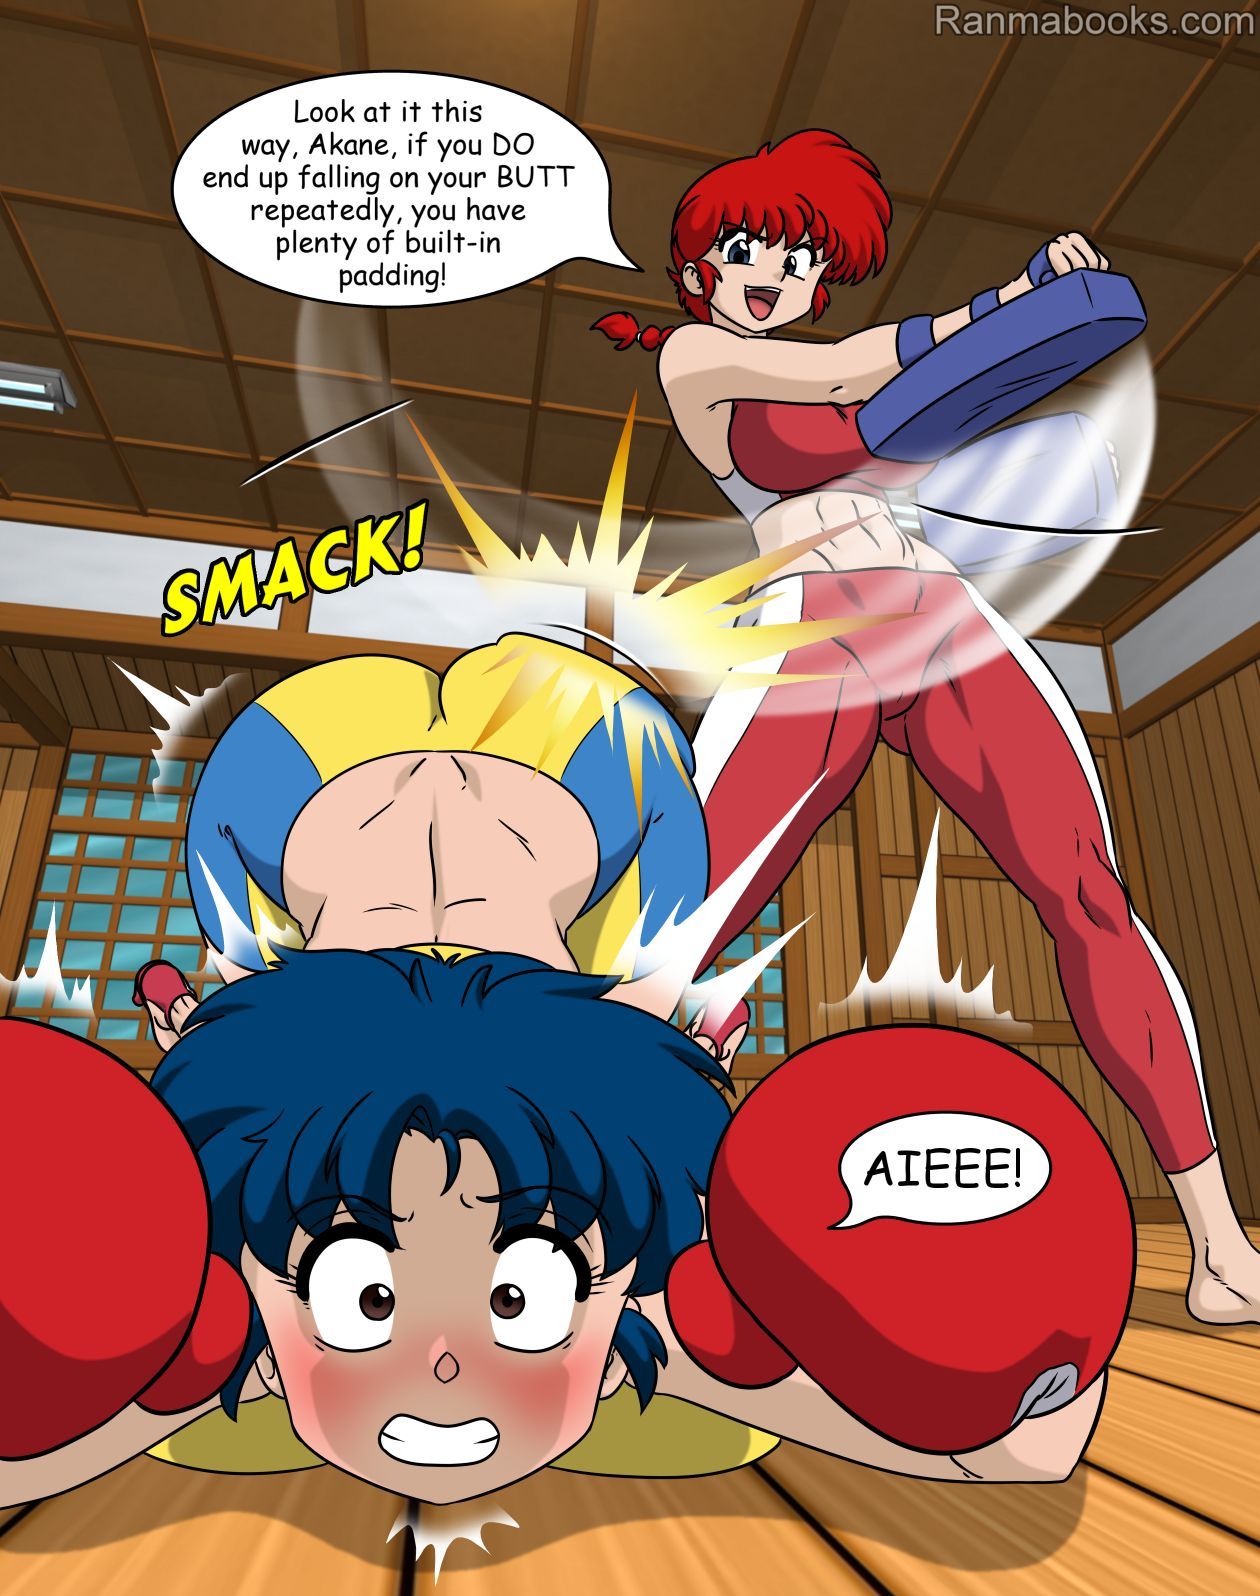 [Ranmabooks.com] New content from RHB! (Ranma 1/2) (Ongoing) 19